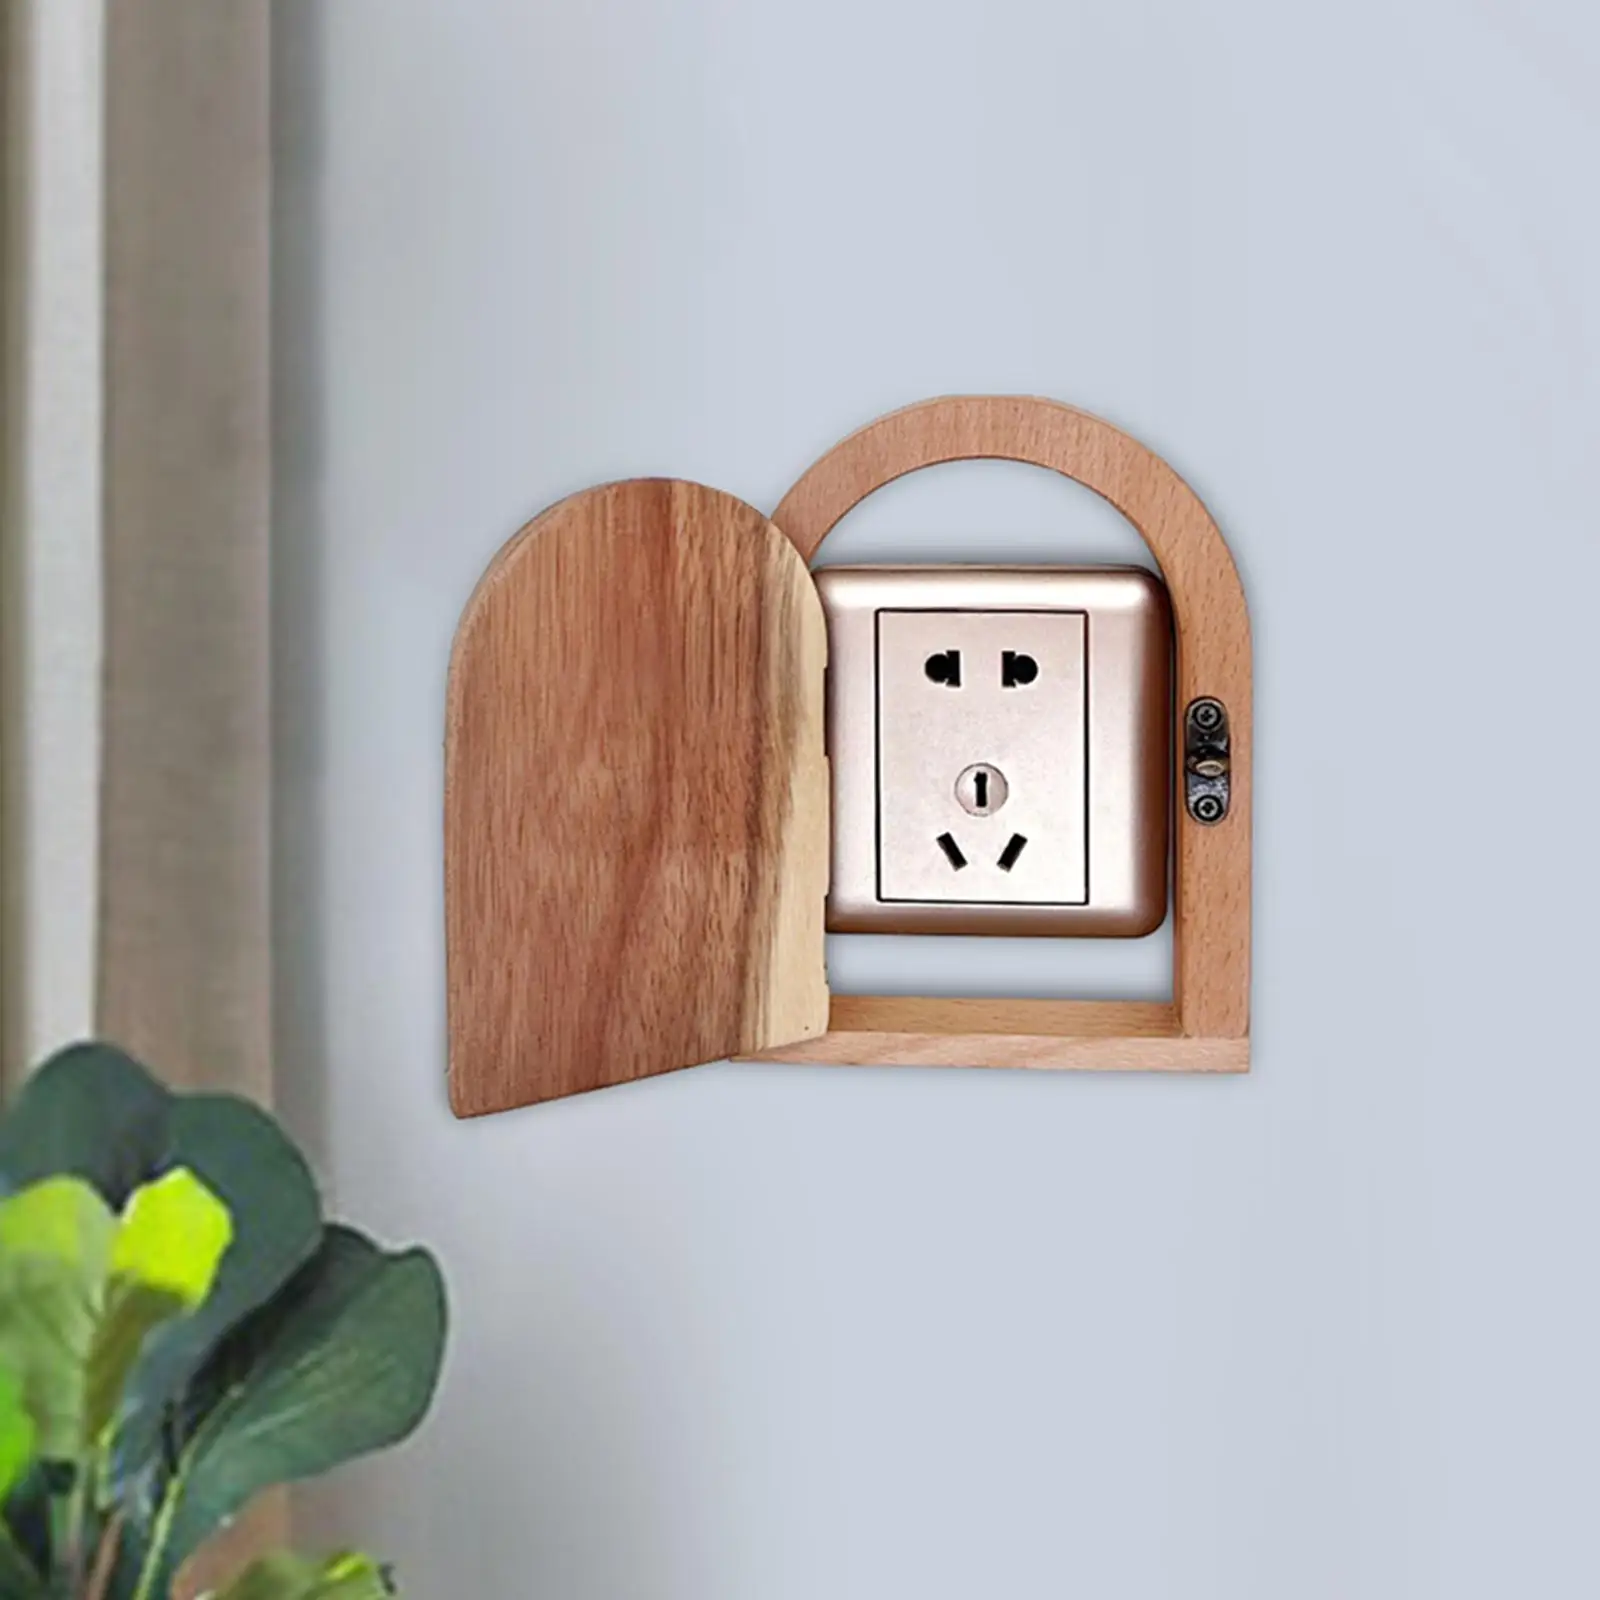 Electrical Outlet Cover Wood Switch Box Dustproof Easy to Install Socket Cover for Living Room Outdoor Kitchen Bedroom Office